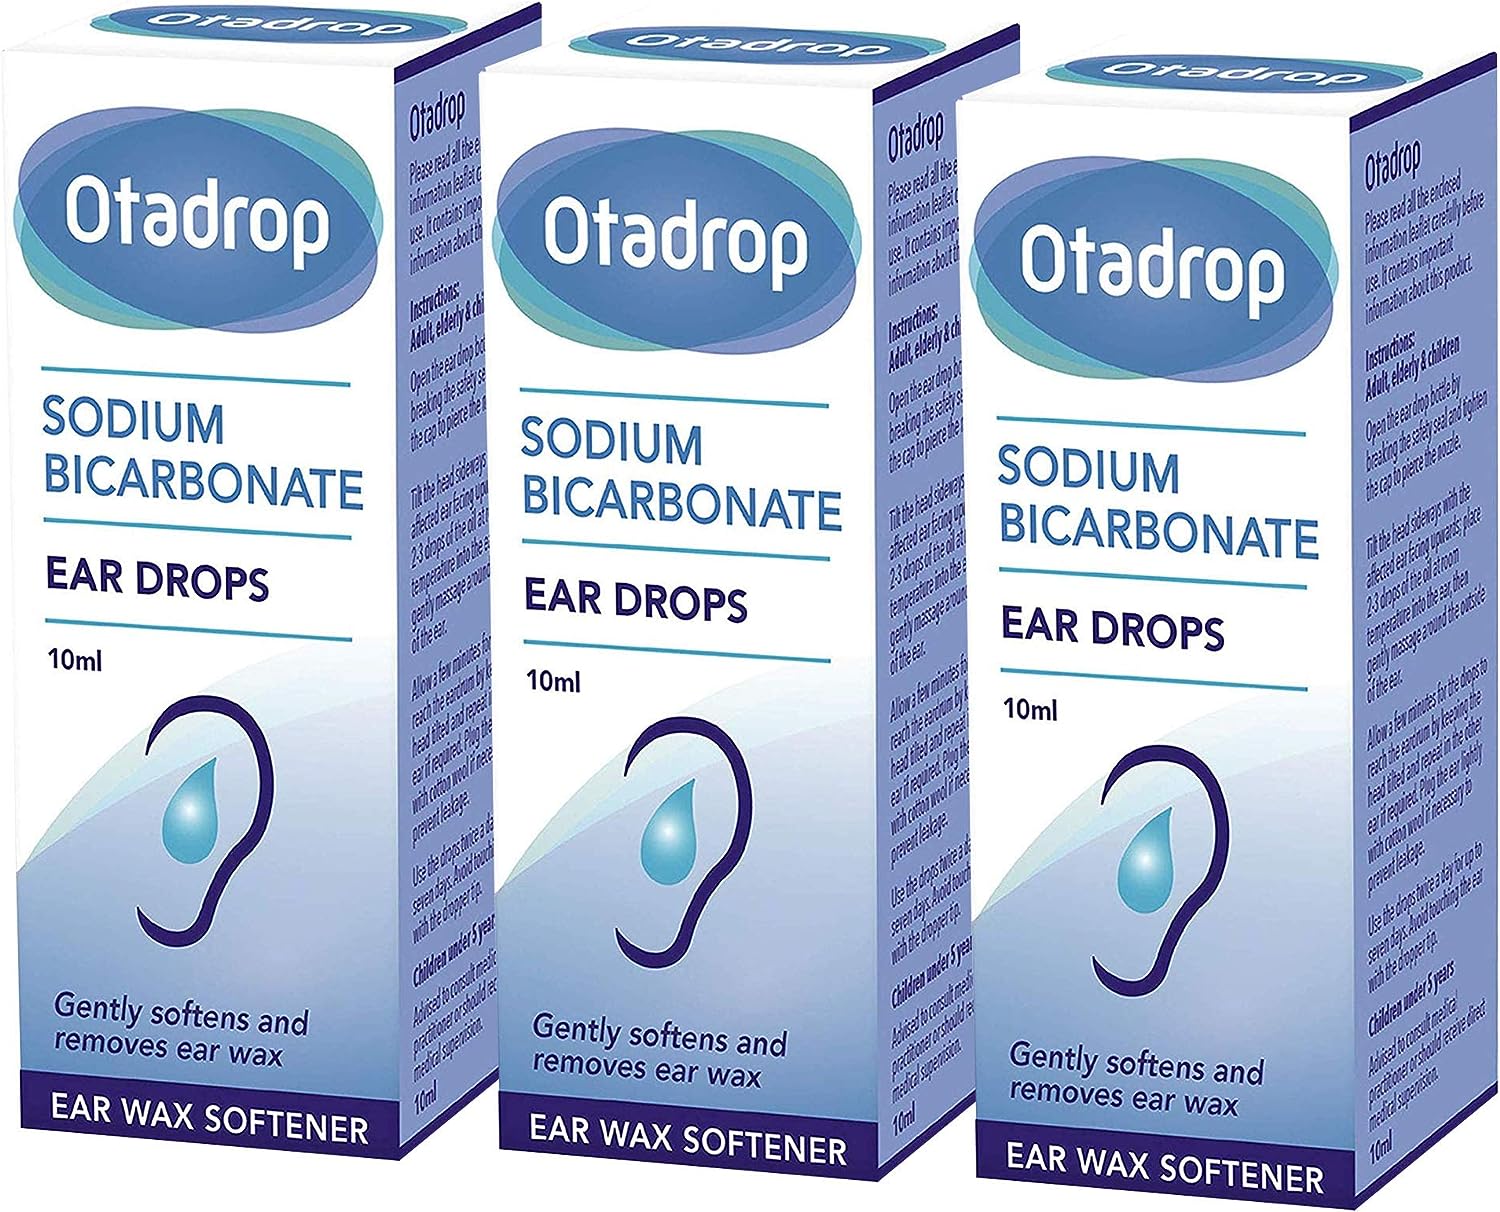 Otadrop Ear Wax Remover Sodium Bicarbonate Drops 10 ml - Pack of 3